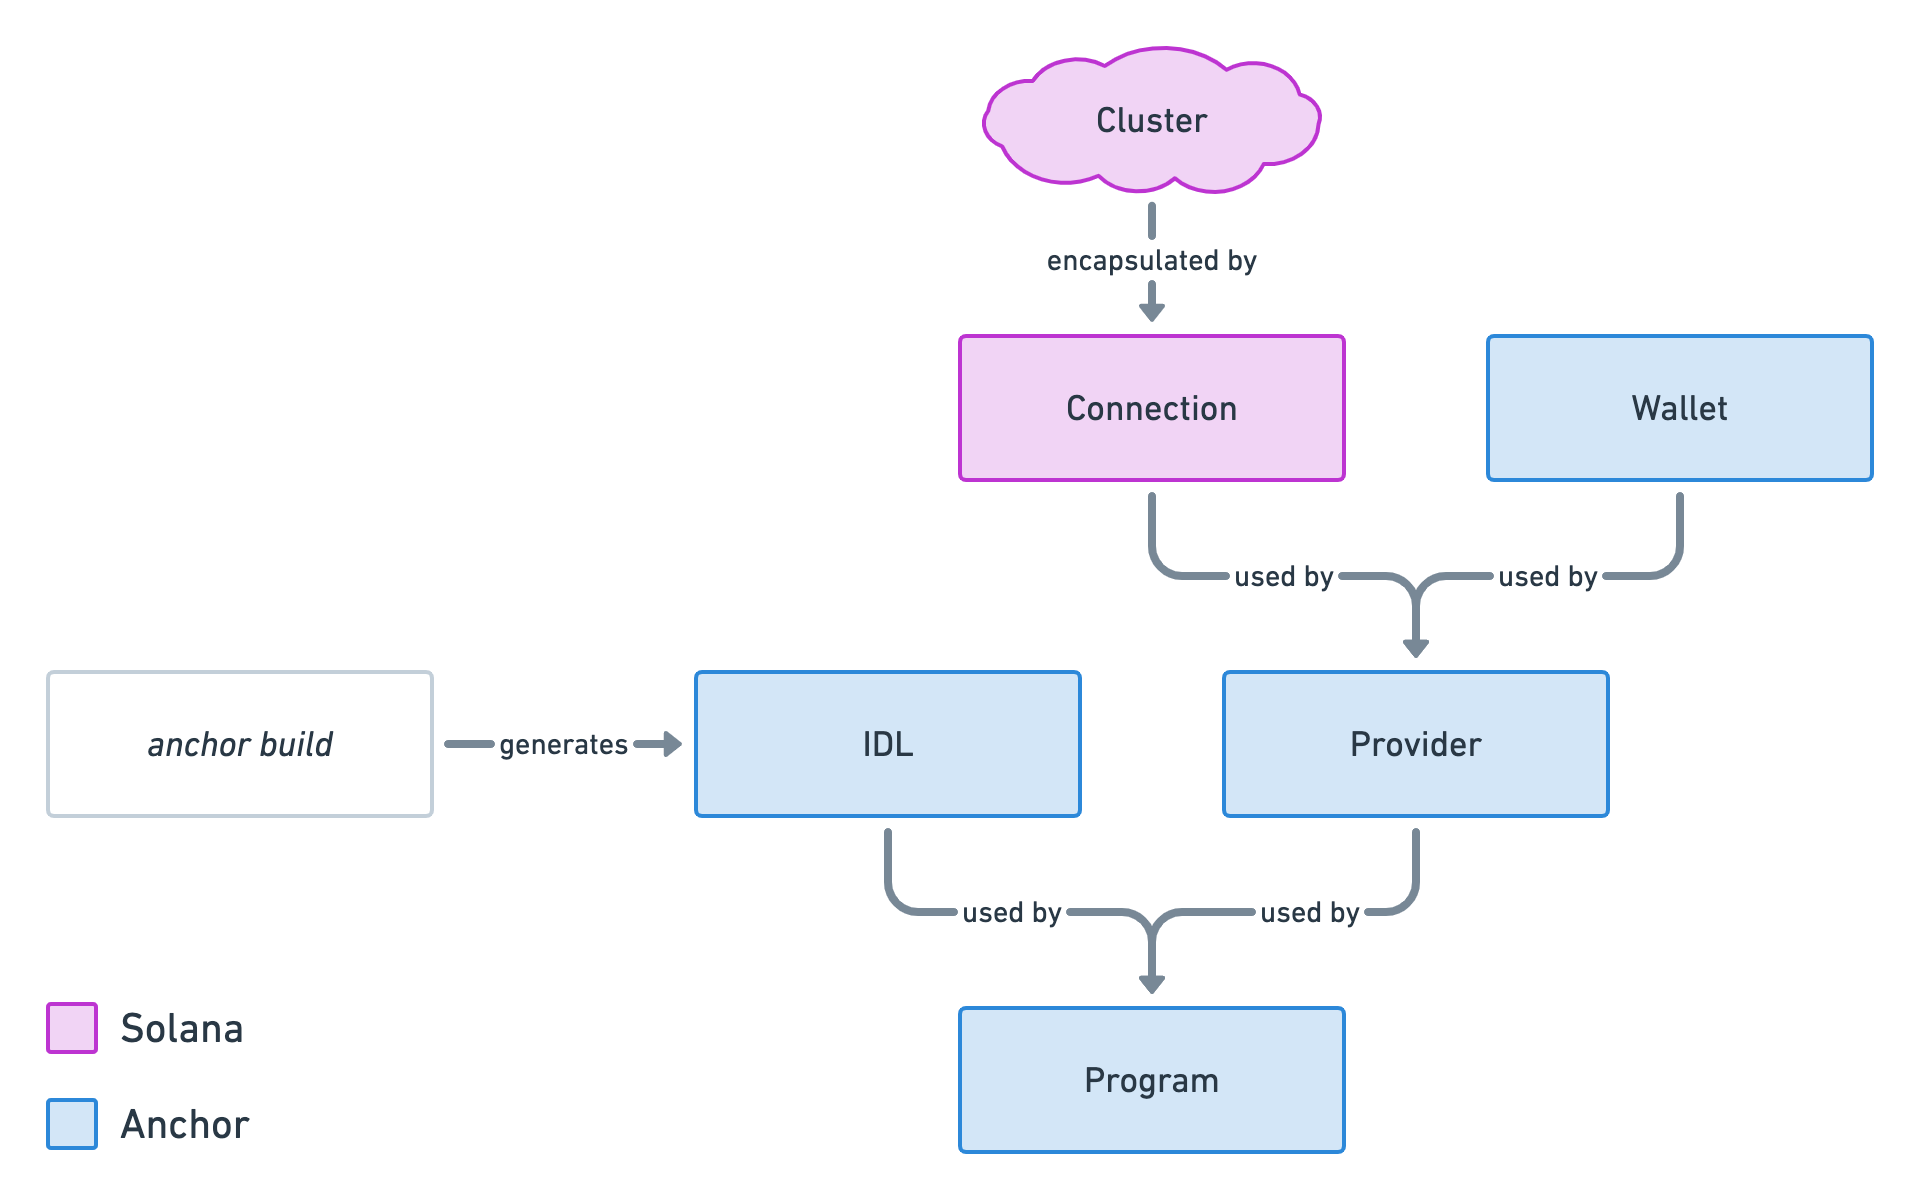 Same diagram as before but with 2 more nodes: one “IDL” node and one “Program” node. The “IDL” node and the “Provider” node both point towards the “Program” node and the arrow says “used by”. There’s also another new node entitled “anchor build” that points towards the “IDL” node and the arrow says “generates”.